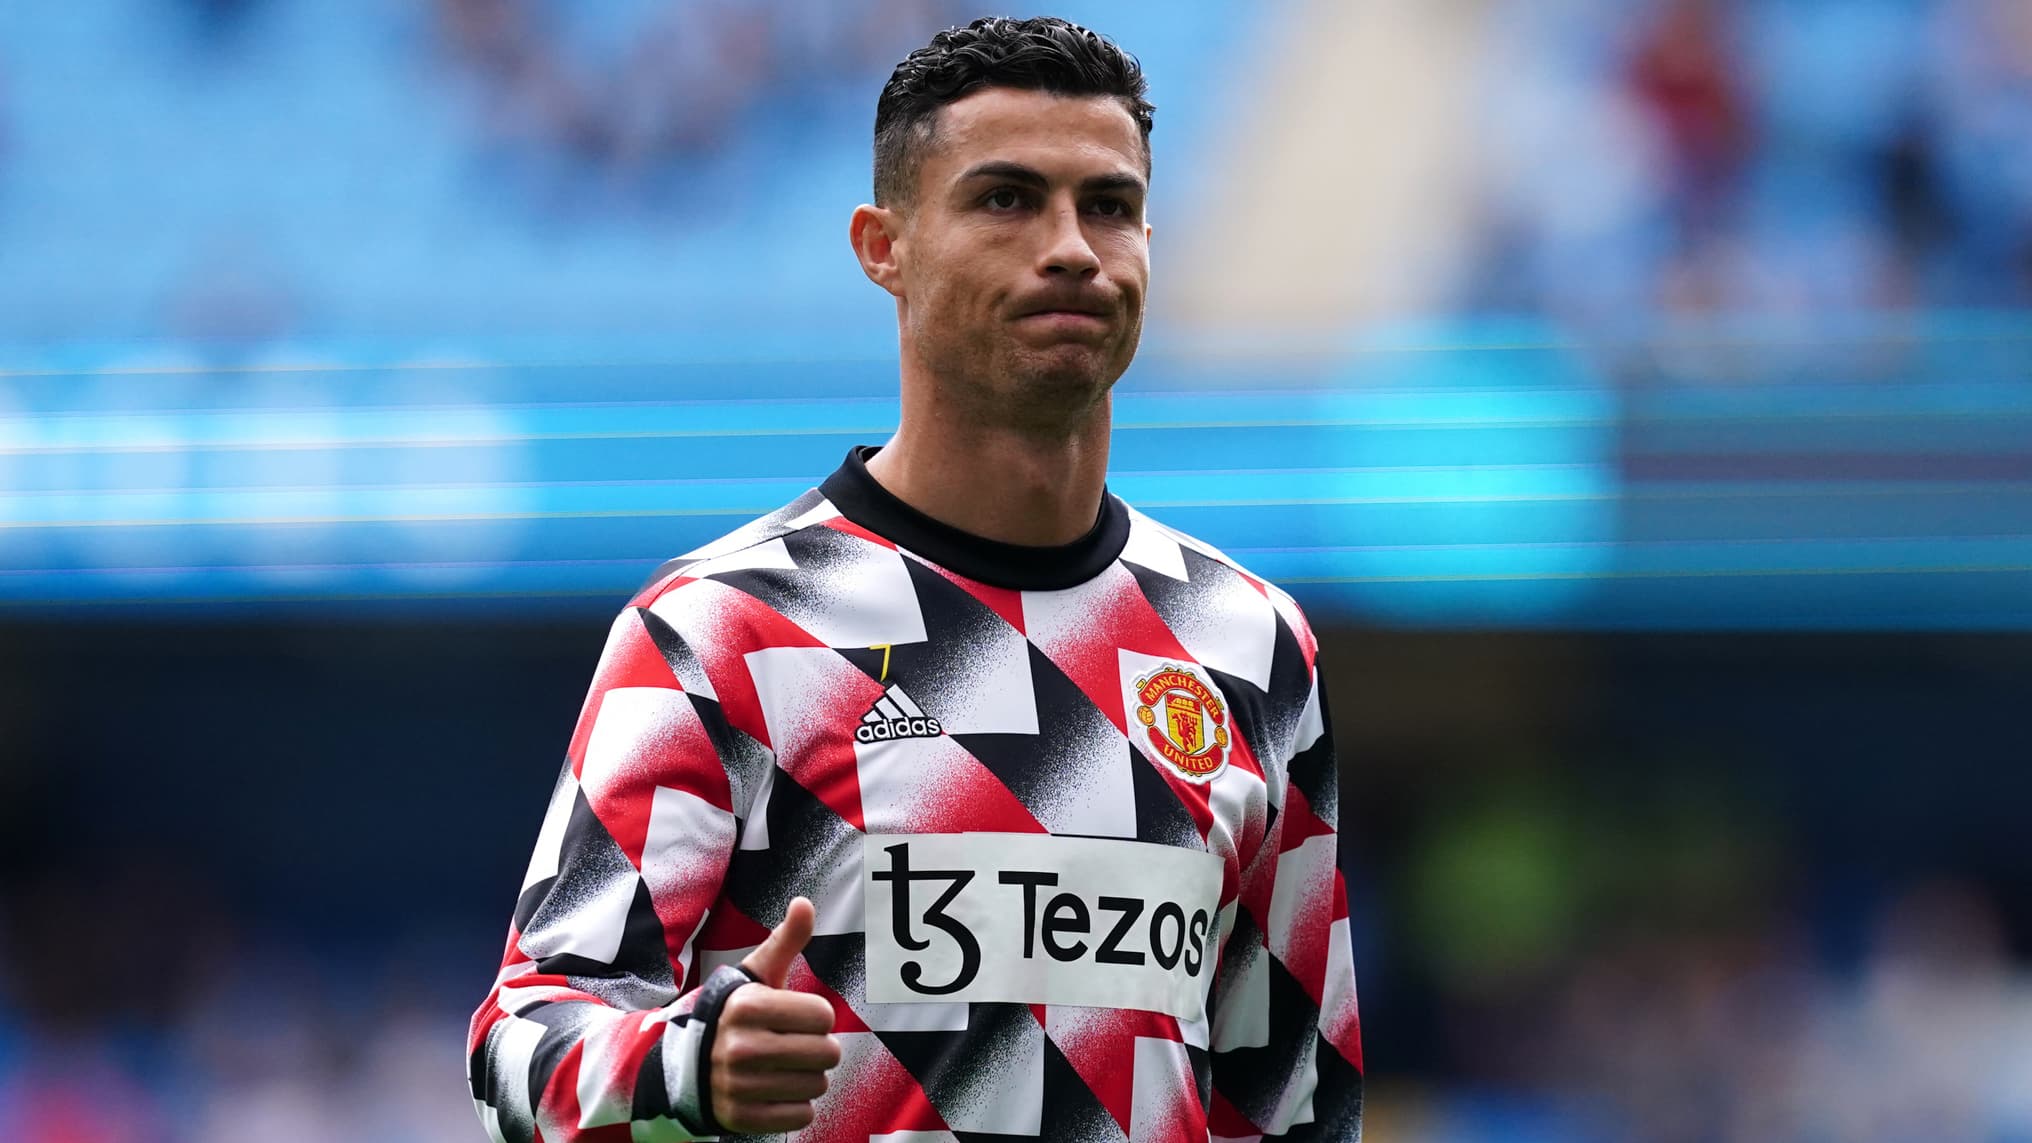 Cristiano Ronaldo’s bloodshed, the last episode of his season in Hell at Manchester United?